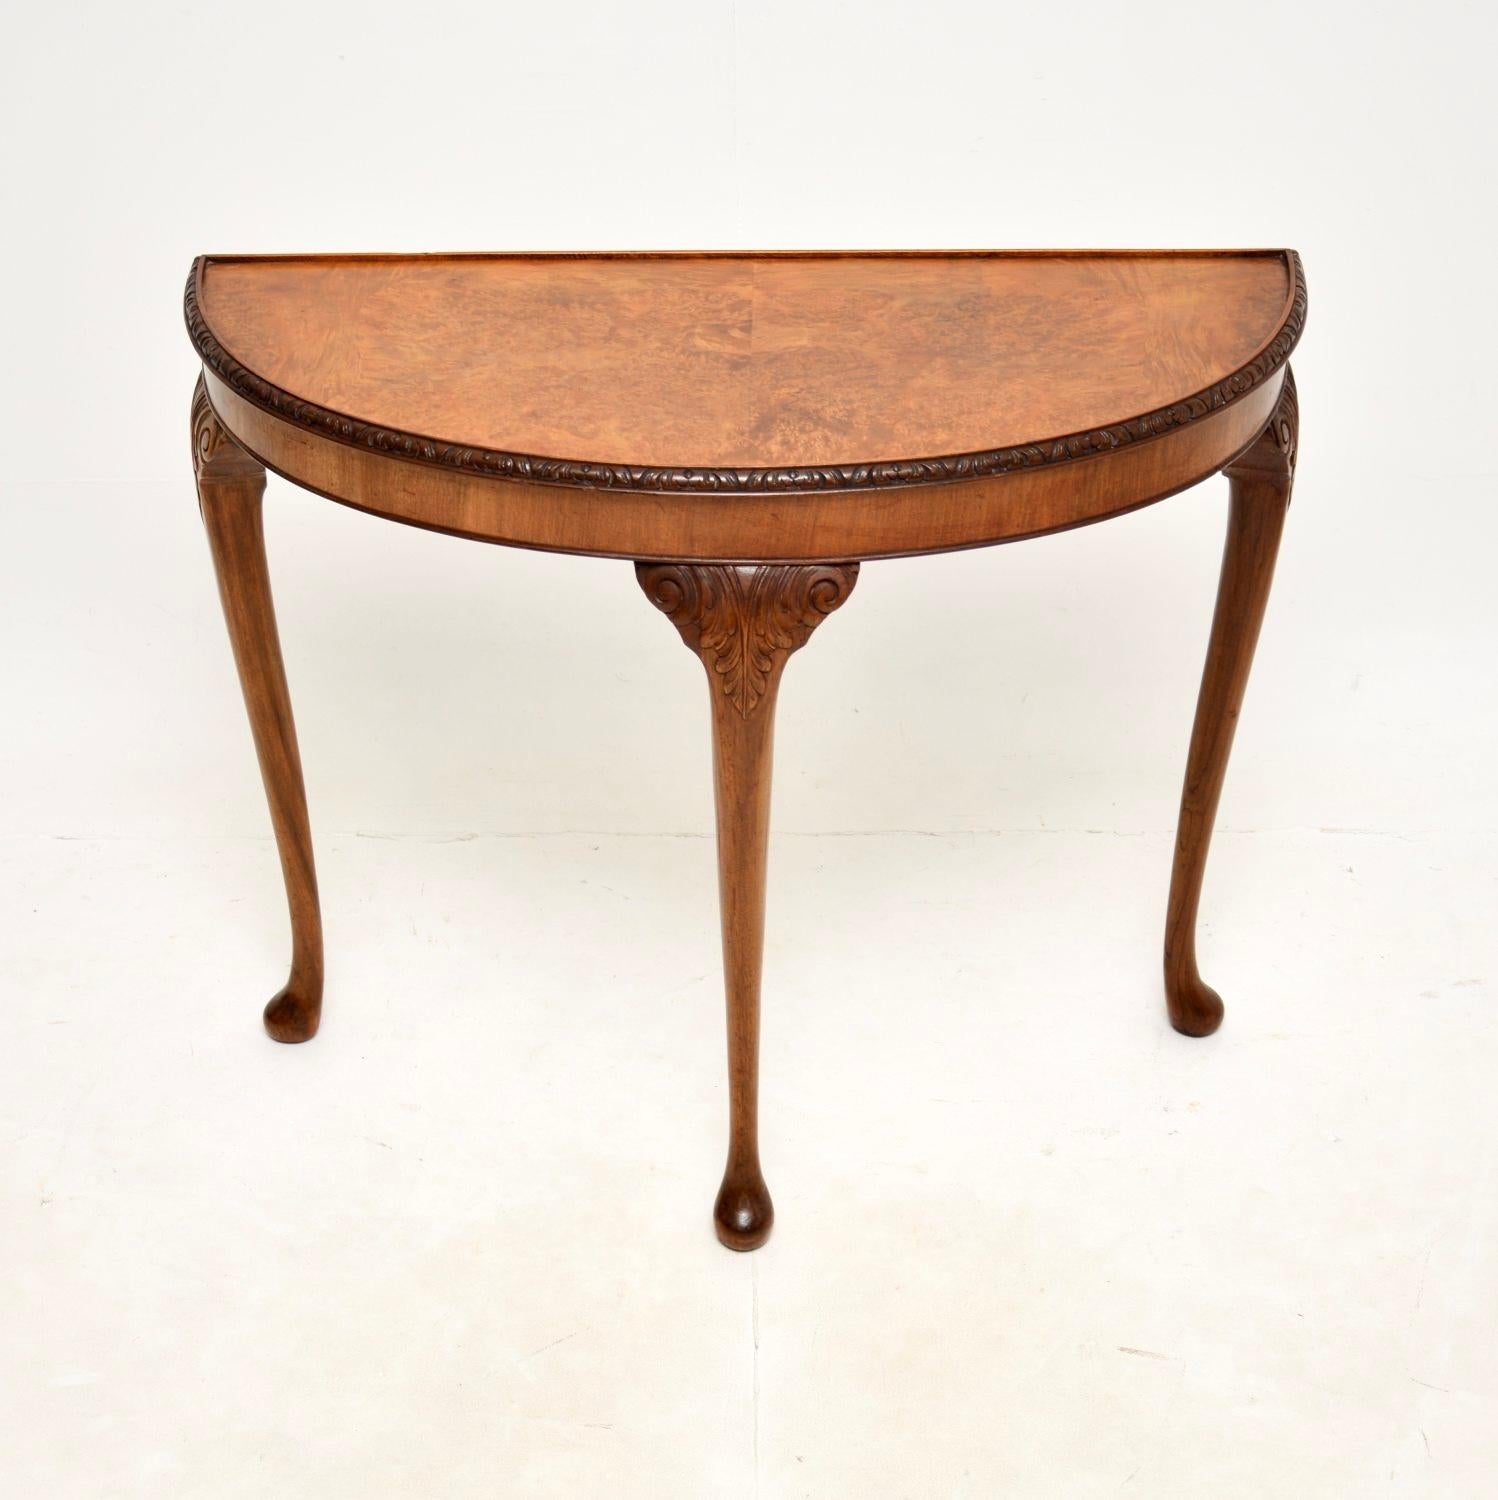 A gorgeous antique burr walnut console table in the Queen Anne style. This was made in England, it dates from around the 1920-30’s.

The quality is superb, this has an elegant yet sturdy design. There are stunning burr walnut grain patterns on the